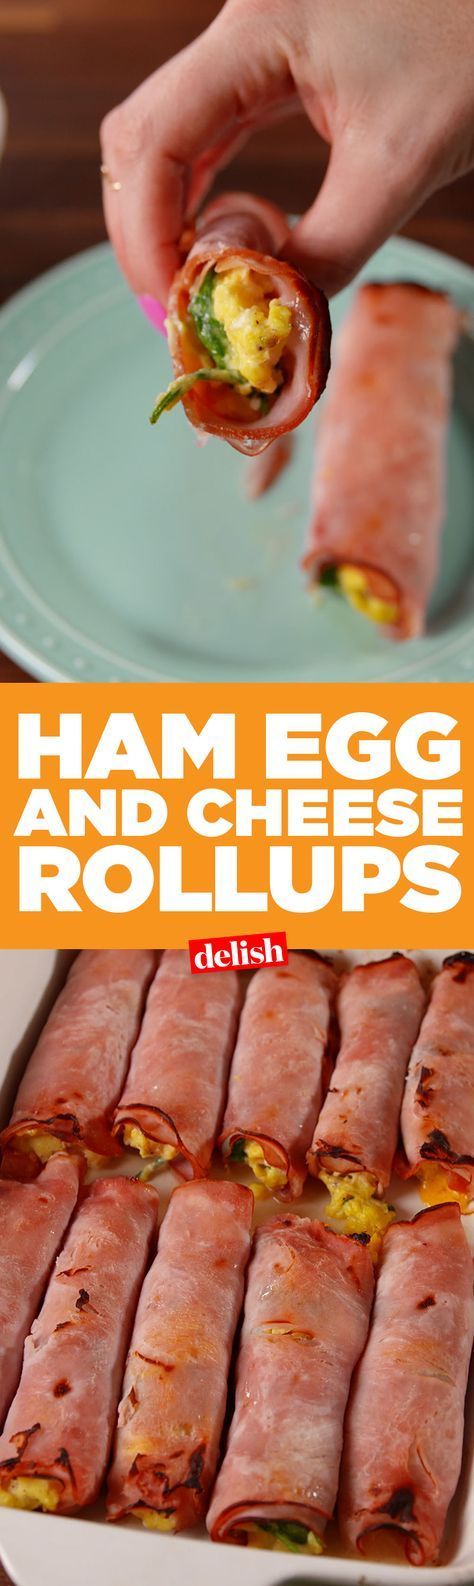 Ham, Egg & Cheese Roll-Ups are like low-carb breakfast burritos. Get the recipe on Delish.com.